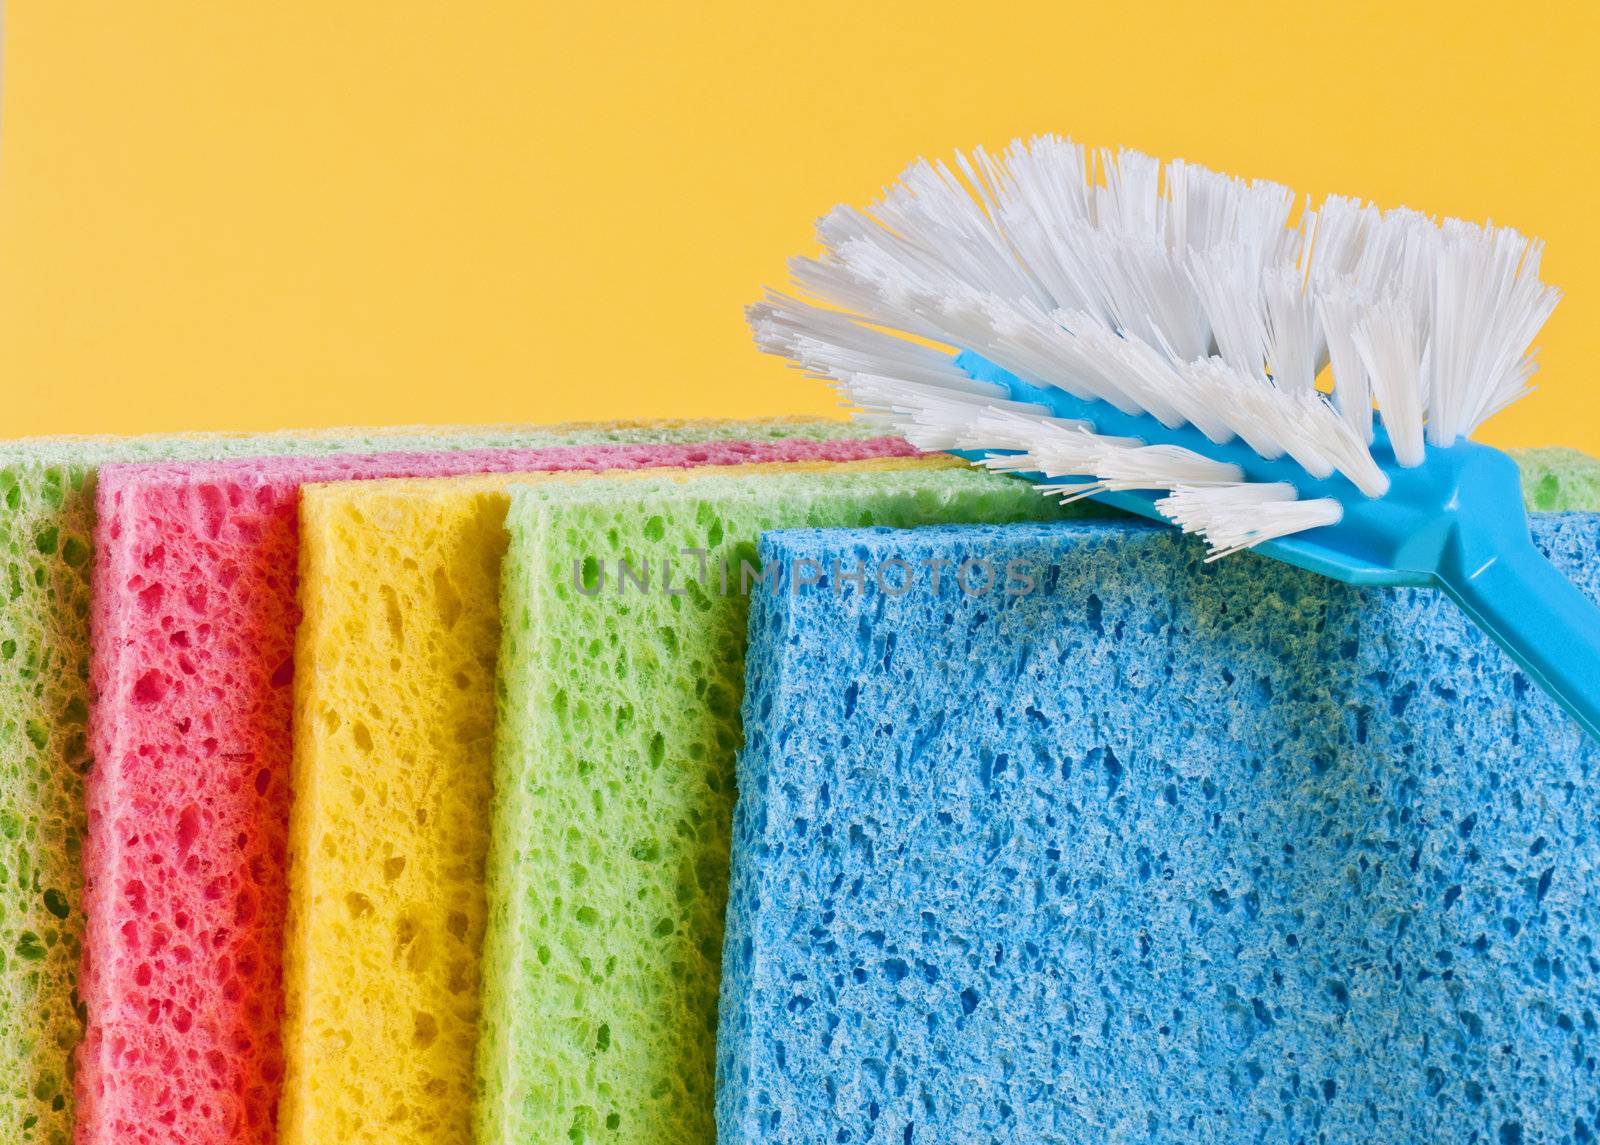 Brush and sponges for cleaning by Nanisimova